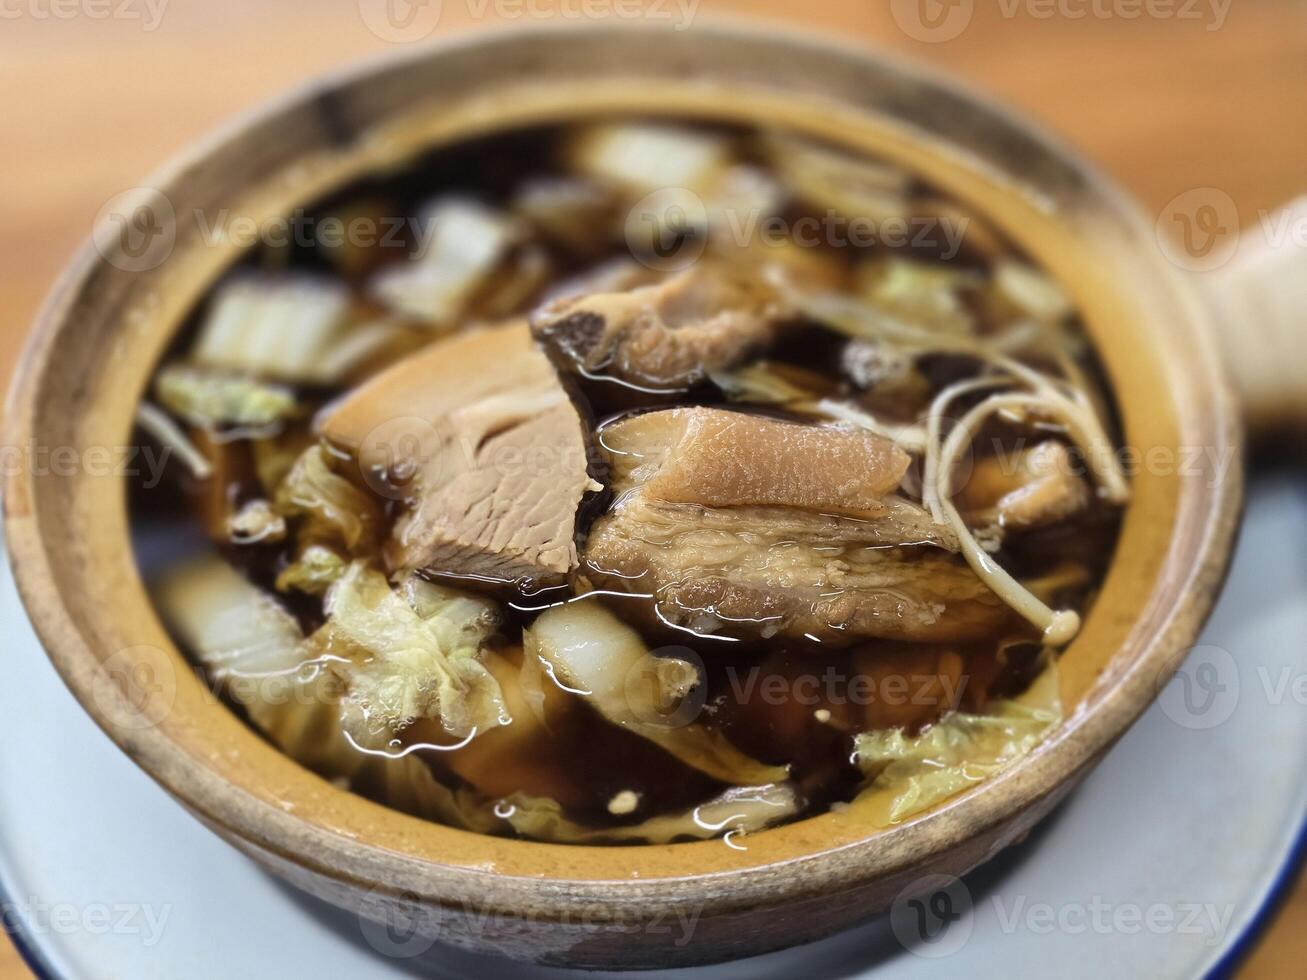 Buk Kut Teh, a Chinese pork soup dish, eat with rice and some vegetable, normally found in Southeast Asia. photo